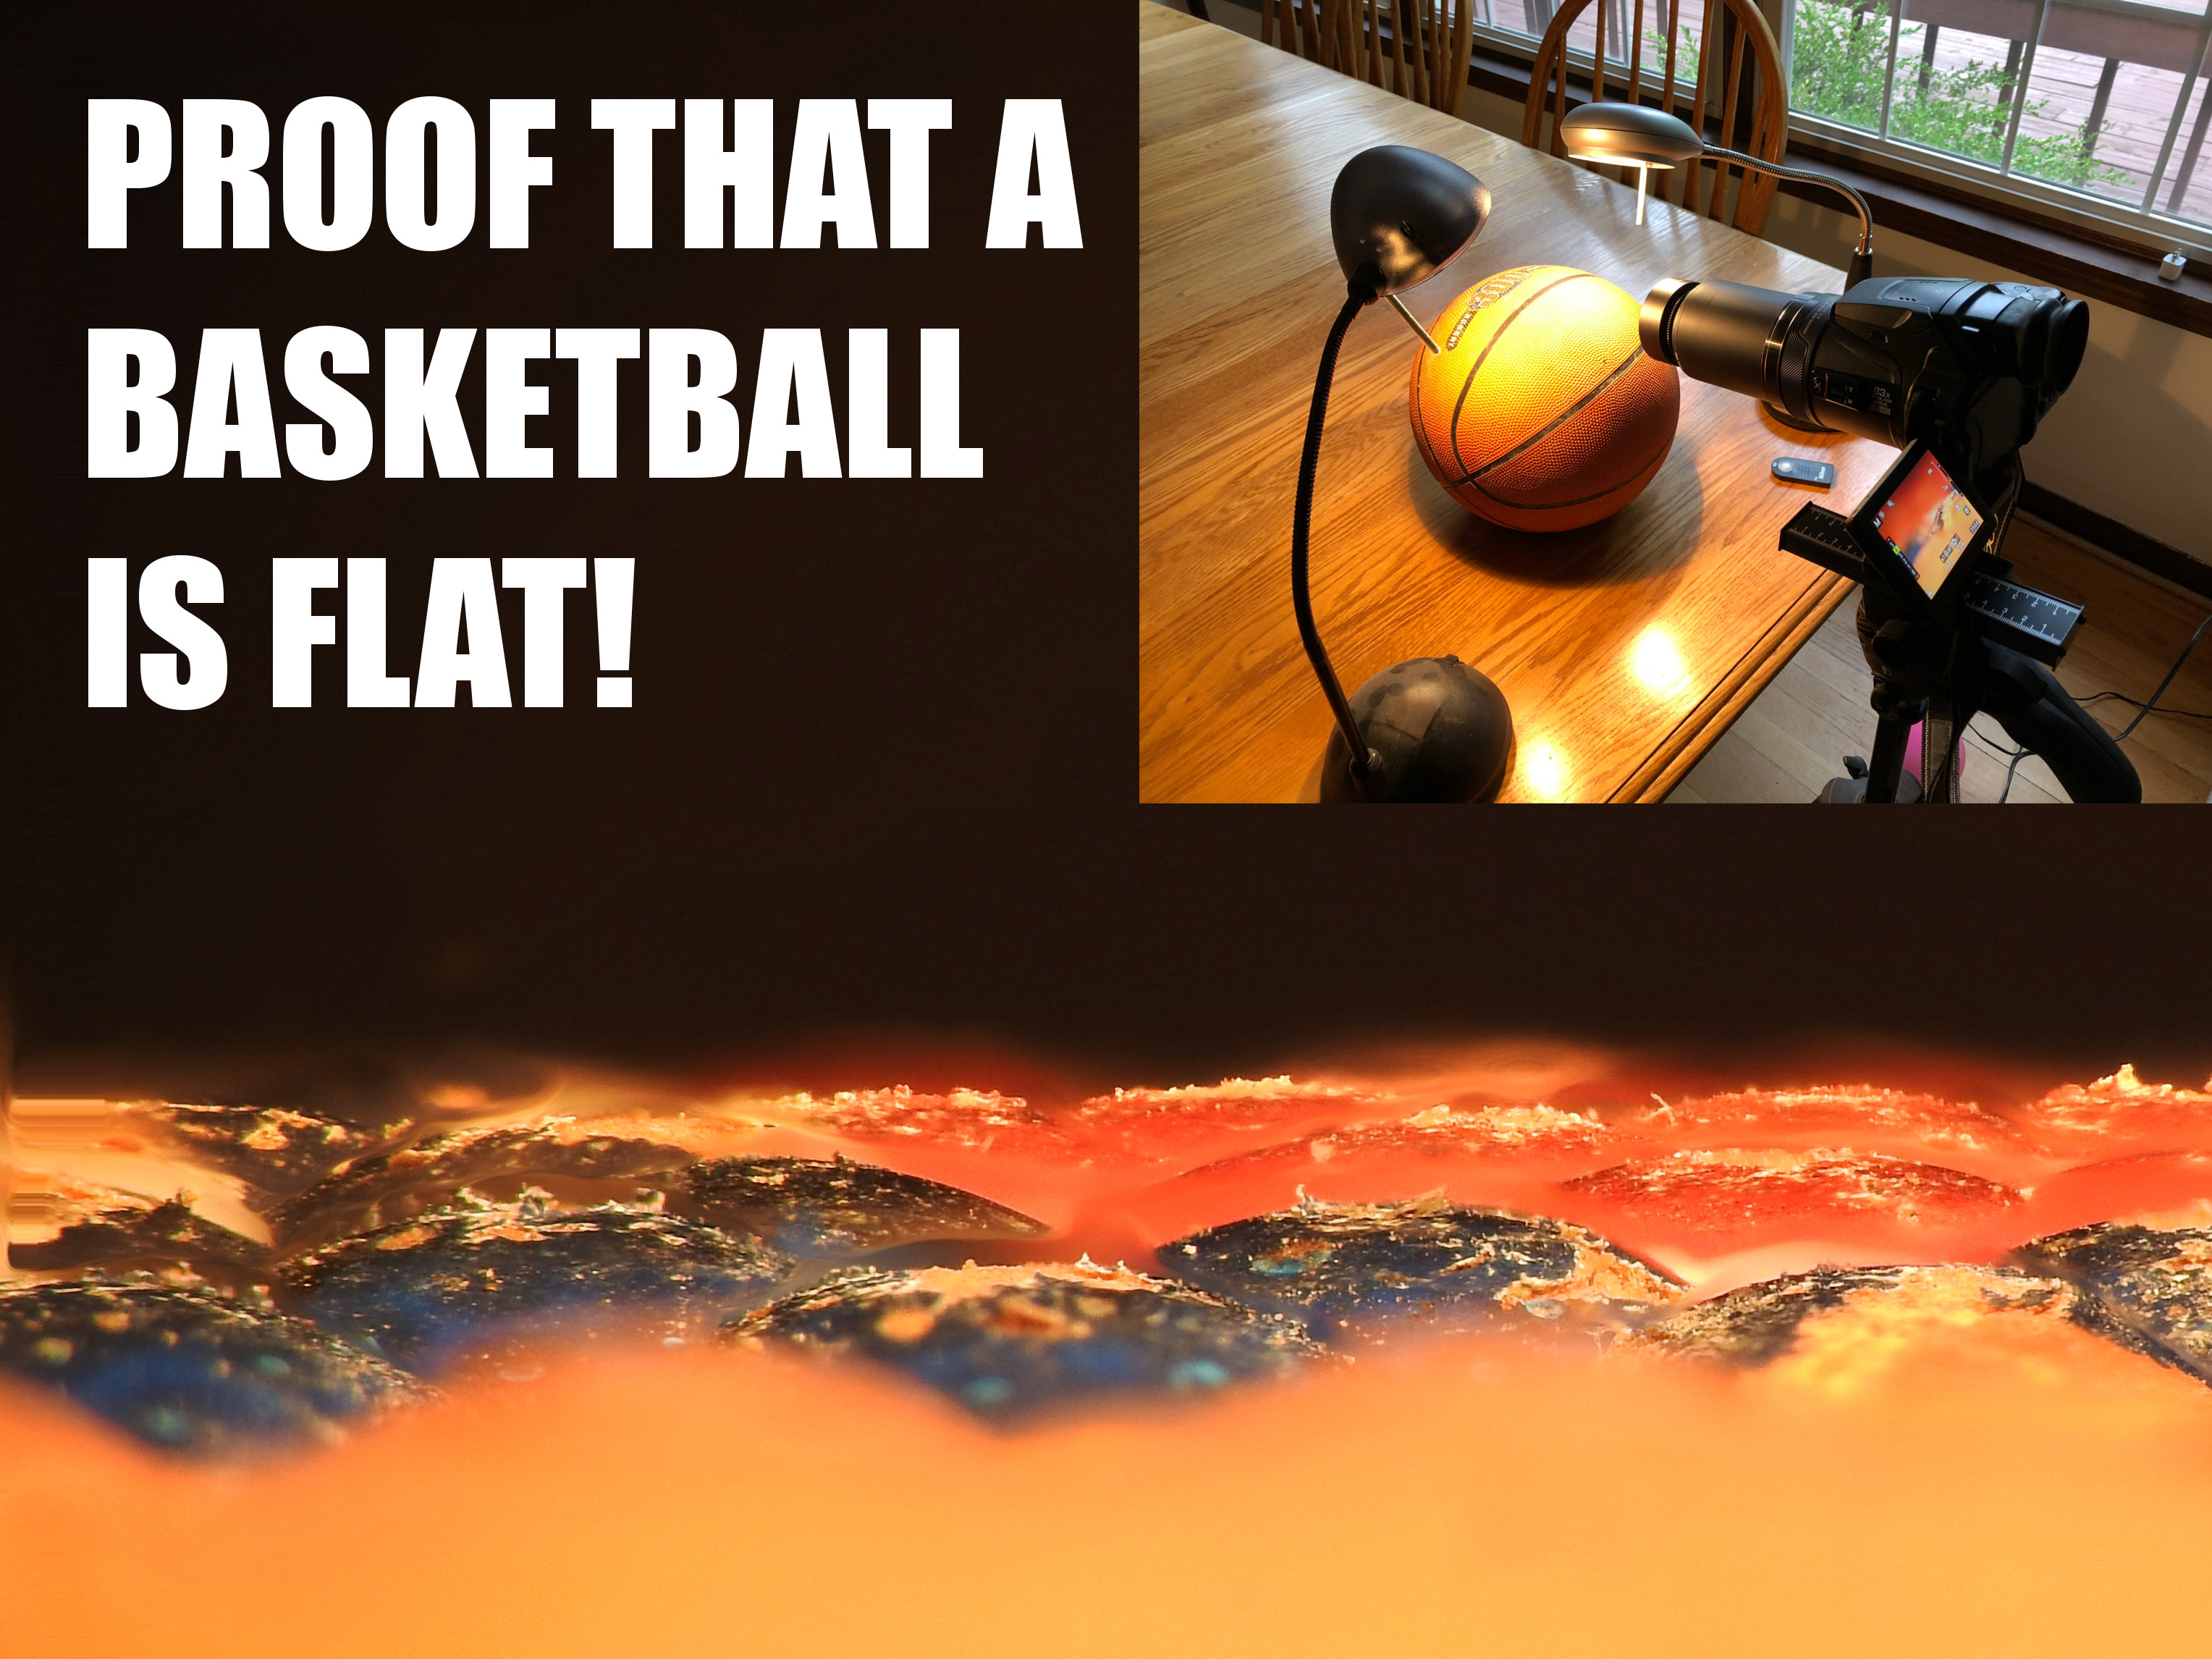 funny picture of a close up on a basketball proving that it is flat